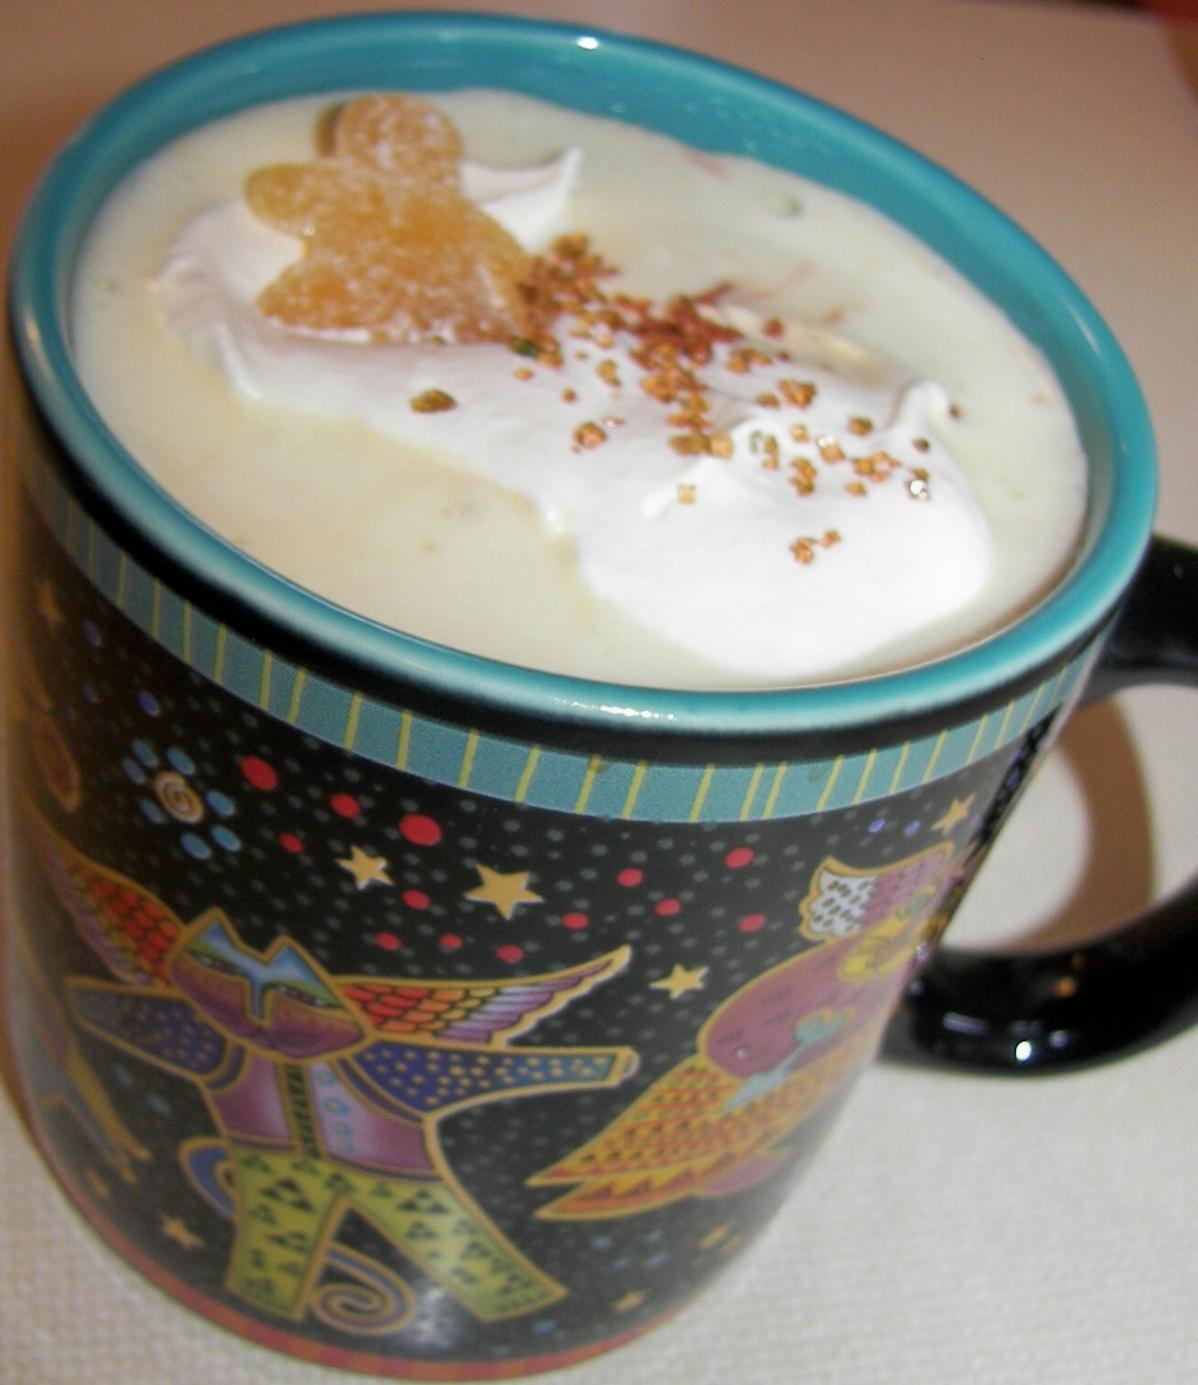  This creamy and decadent Rum Velvet Coffee is a winter delight!